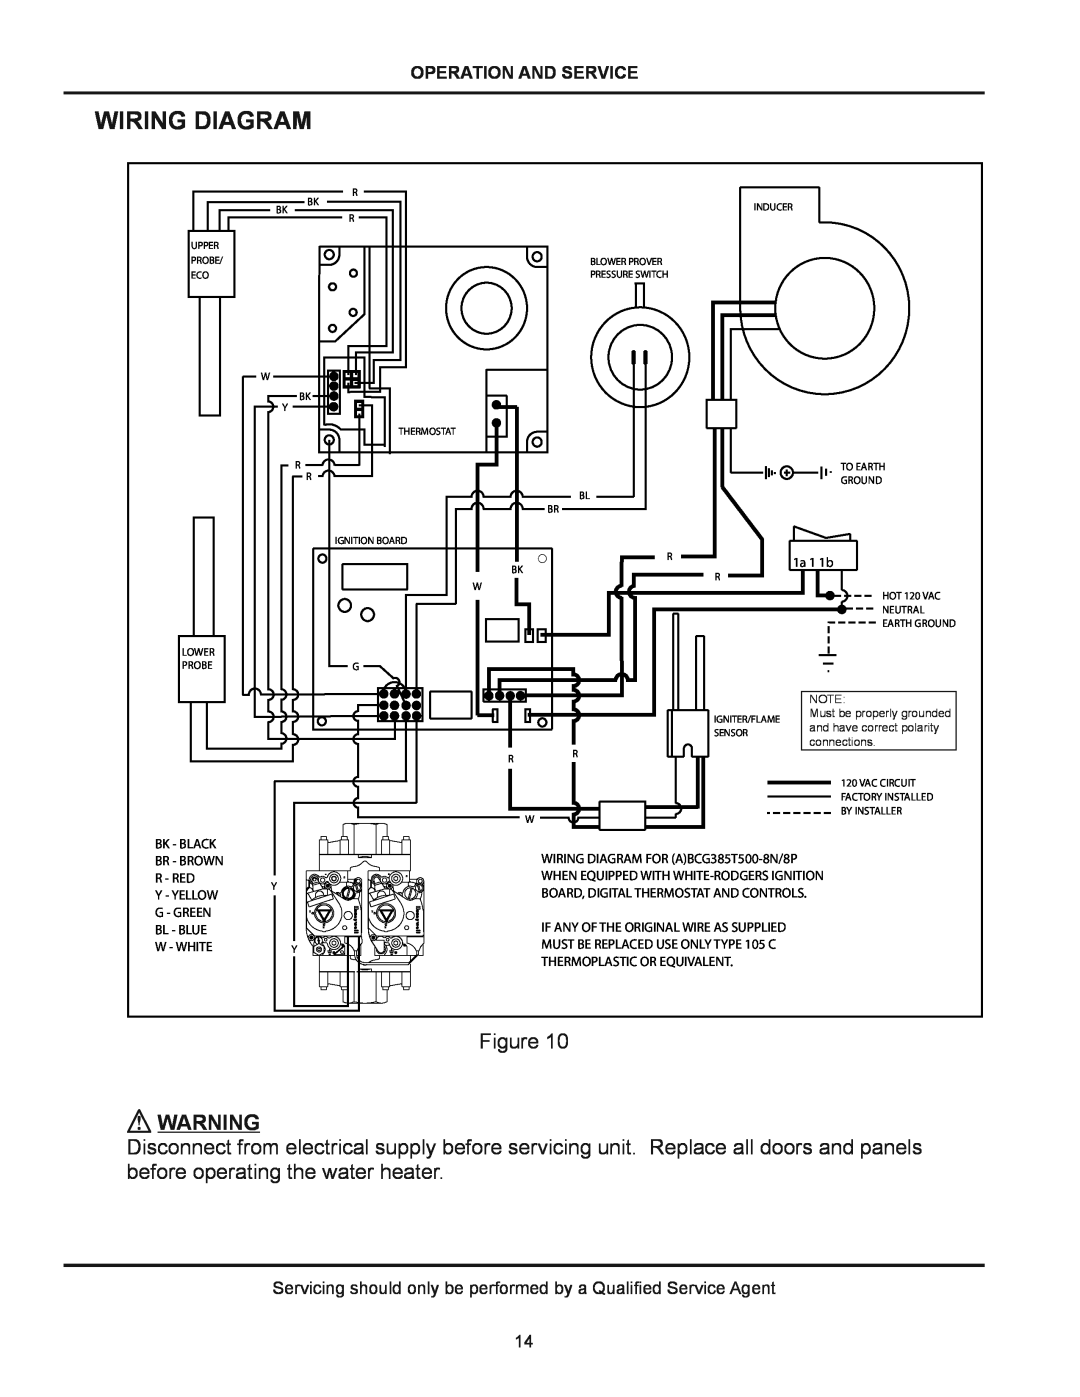 American Water Heater (A)BCG38T500-8P Wiring Diagram, Operation And Service, 1a 1 1b, Bk - Black, Br - Brown, R - Red 